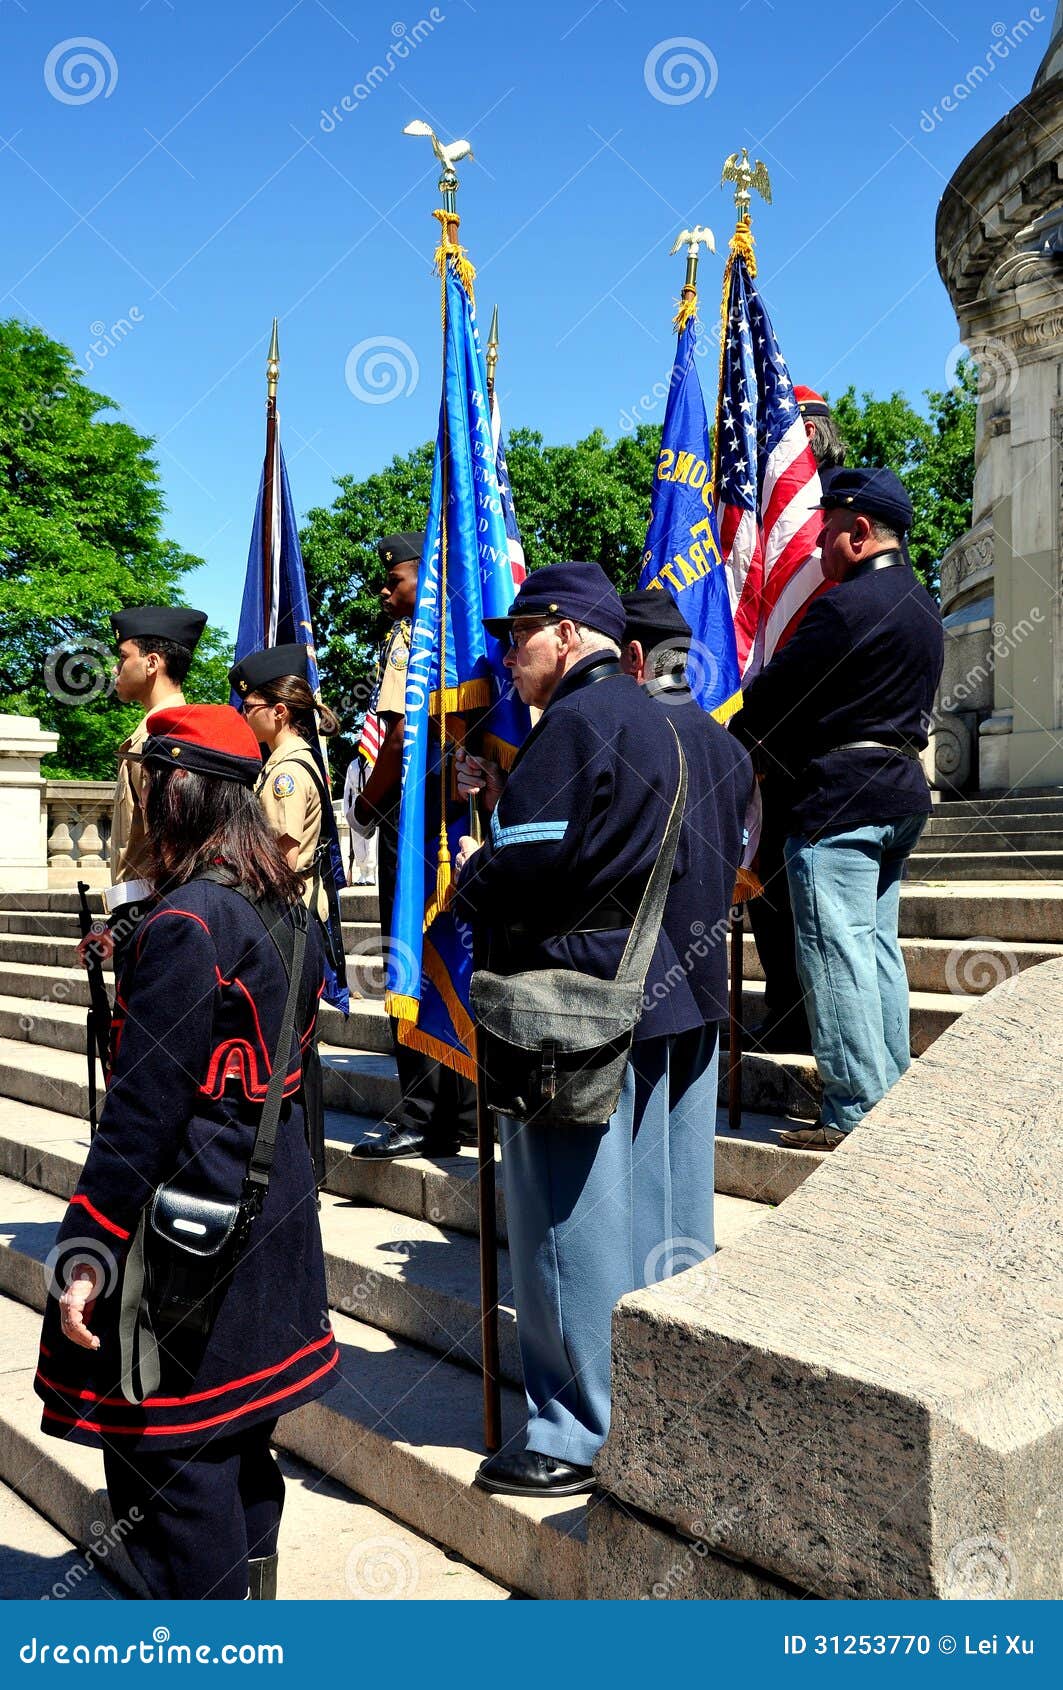 NYC: Memorial Day 2013 Ceremonies. Members of the Sons of Union Veterans of the Civil War (1861-65) on the steps of the Soldiers and Sailors Monument during the 2013 Memorial Day ceremonies in NYC.